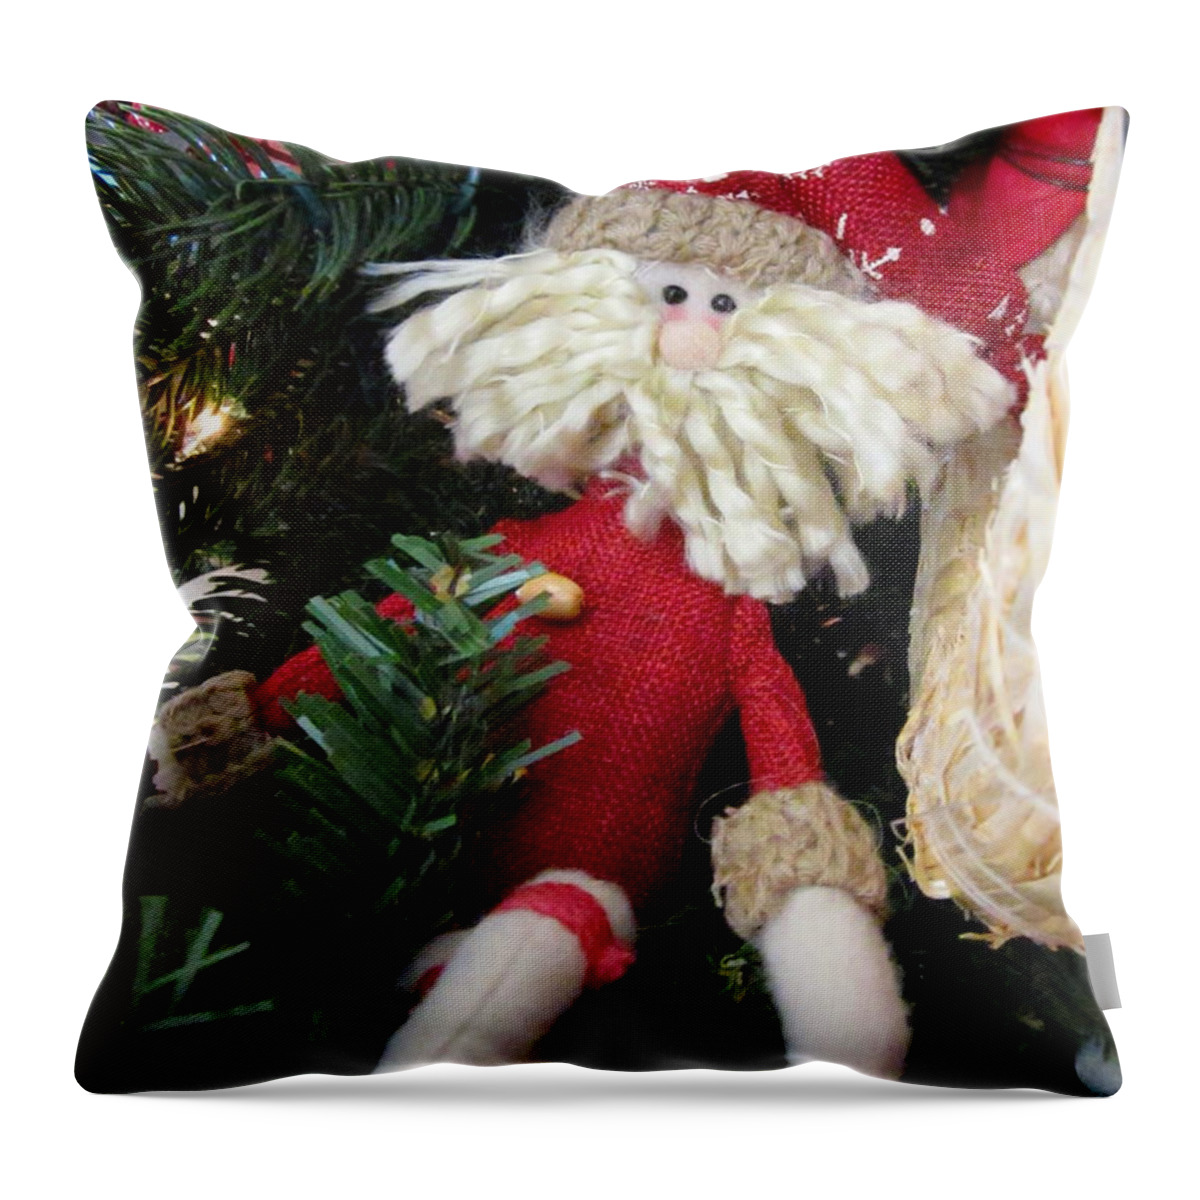 Ornaments Throw Pillow featuring the photograph Burlap and Yarn Santa by Cynthia Clark